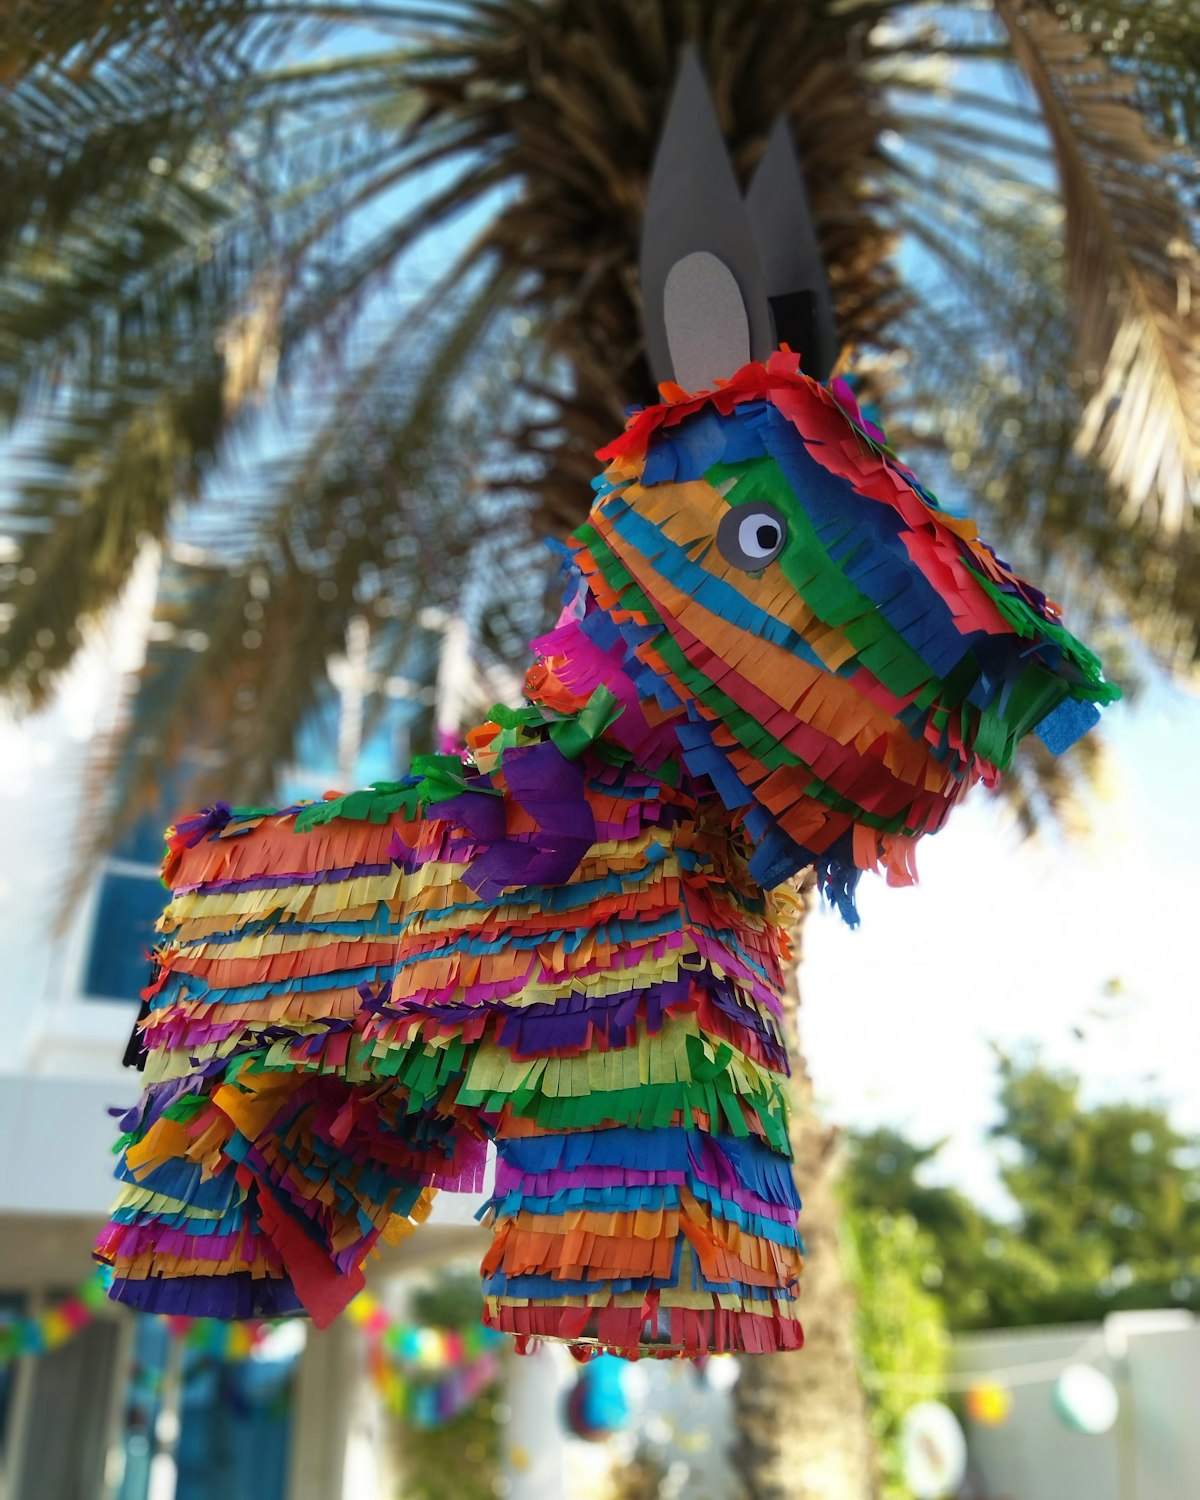 Handicraft market, the tradition, and culture of Mexico